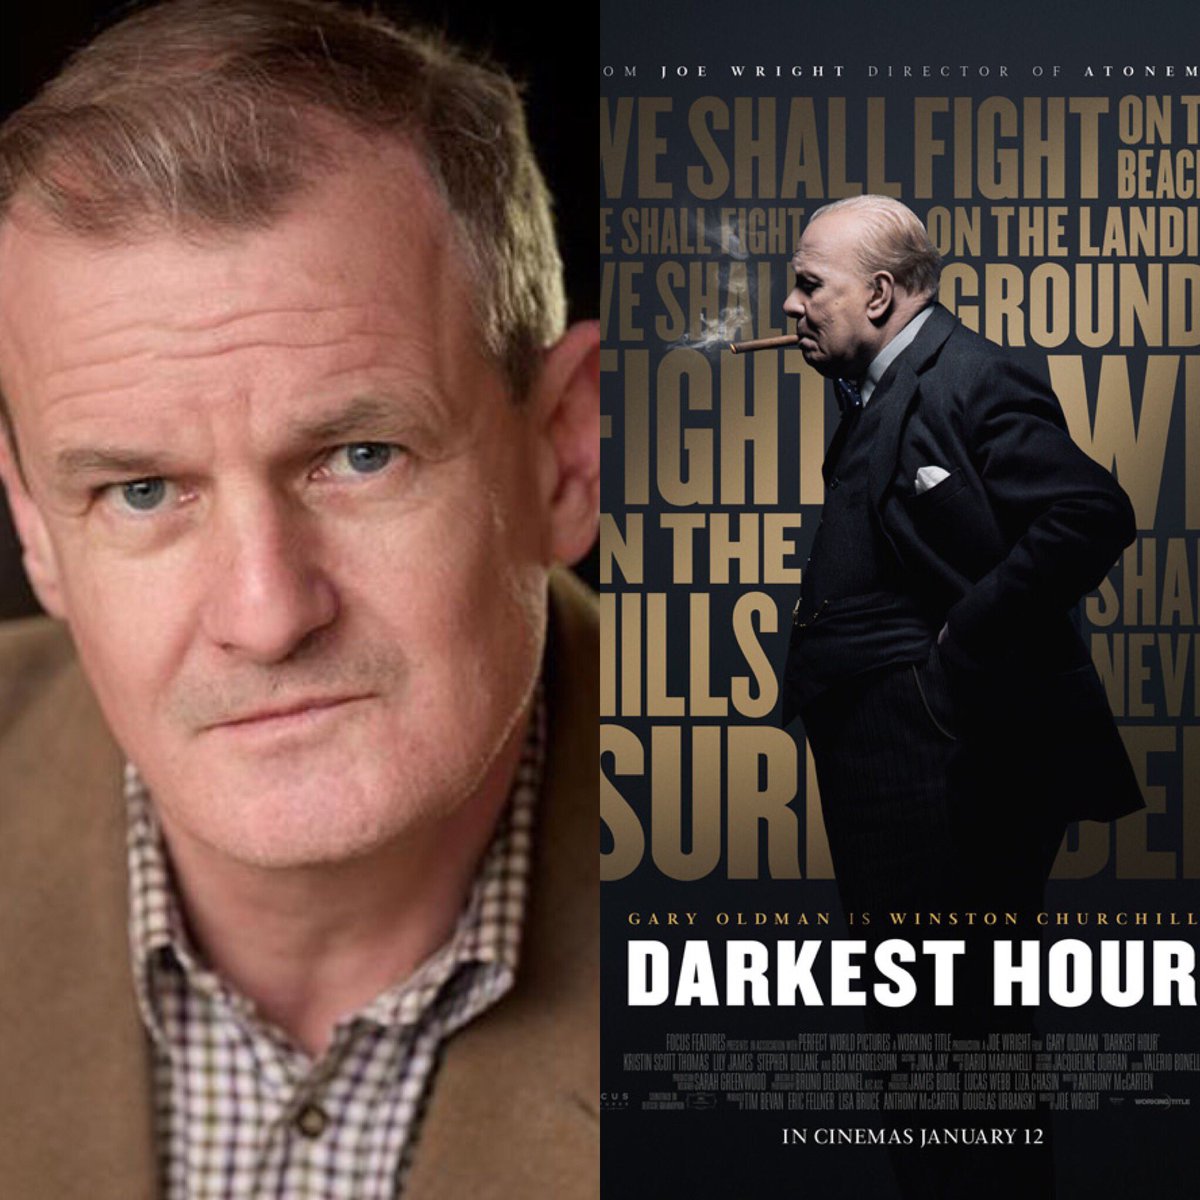 #DarkestHour reaches UK cinemas today! Our very own Miles Gallant appears in the film. Make sure you go and see it! #wcm #wcmteam #agent #actor